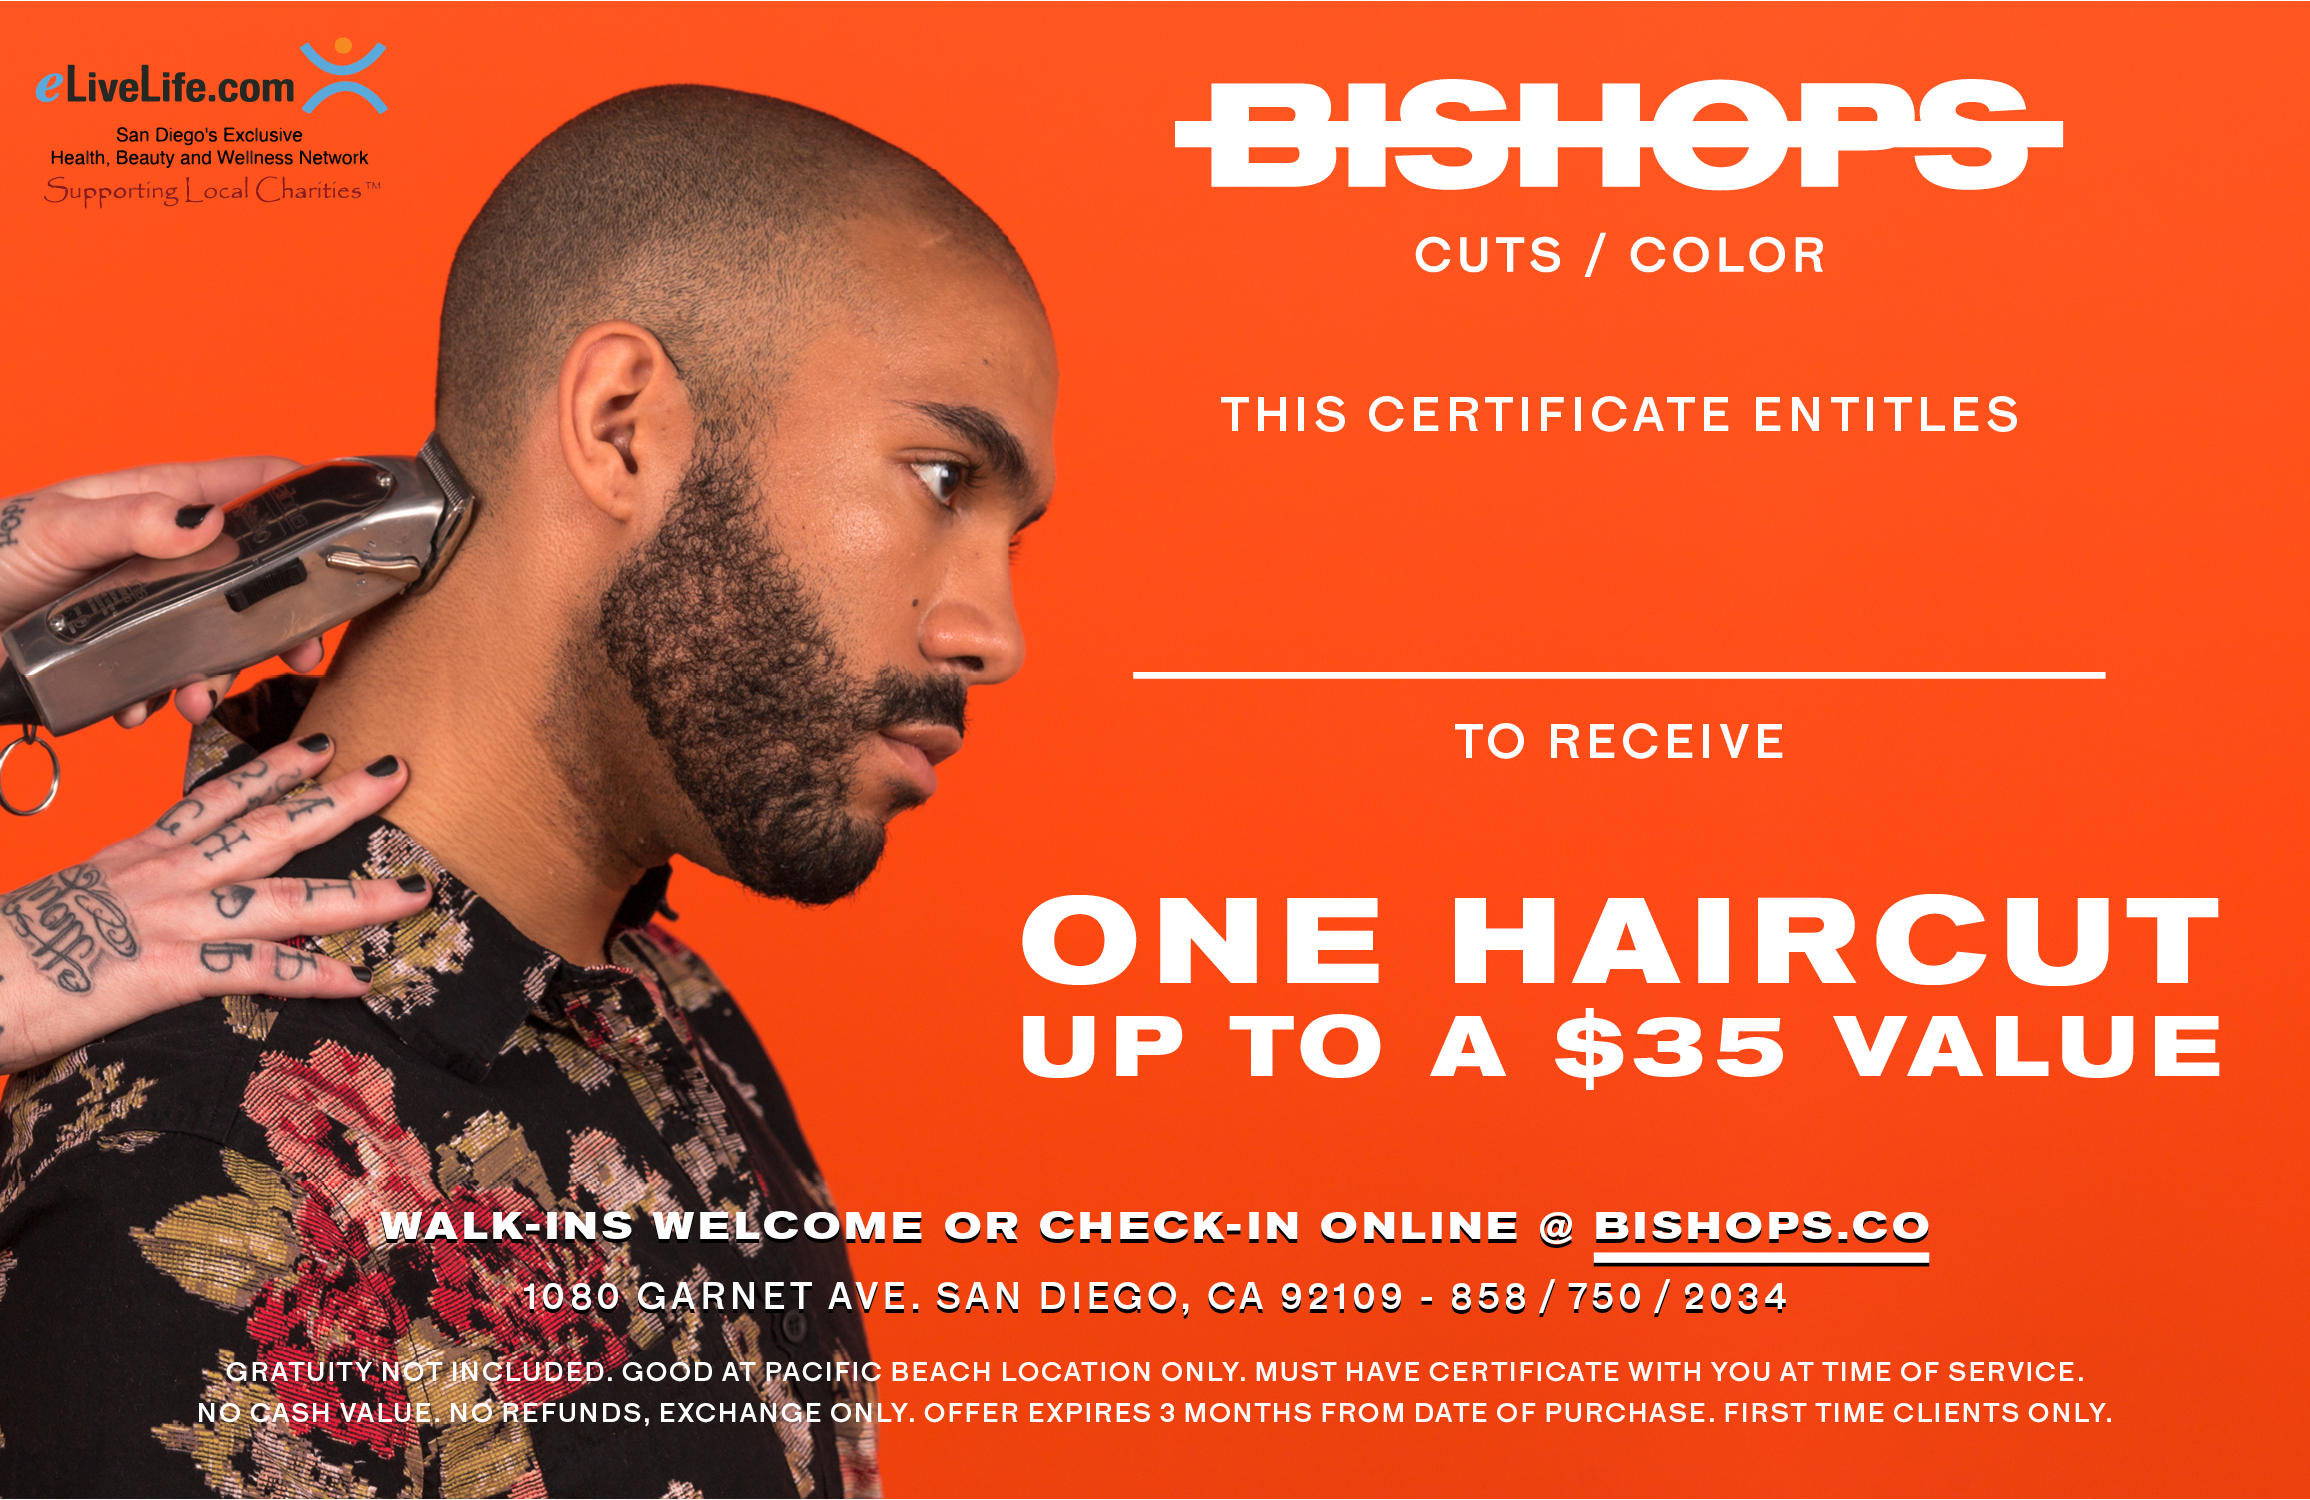 Hair Care :: BISHOPS CUTS/COLOR ONE HAIRCUT - Elivelife - San Diego's Best  Spa Deals